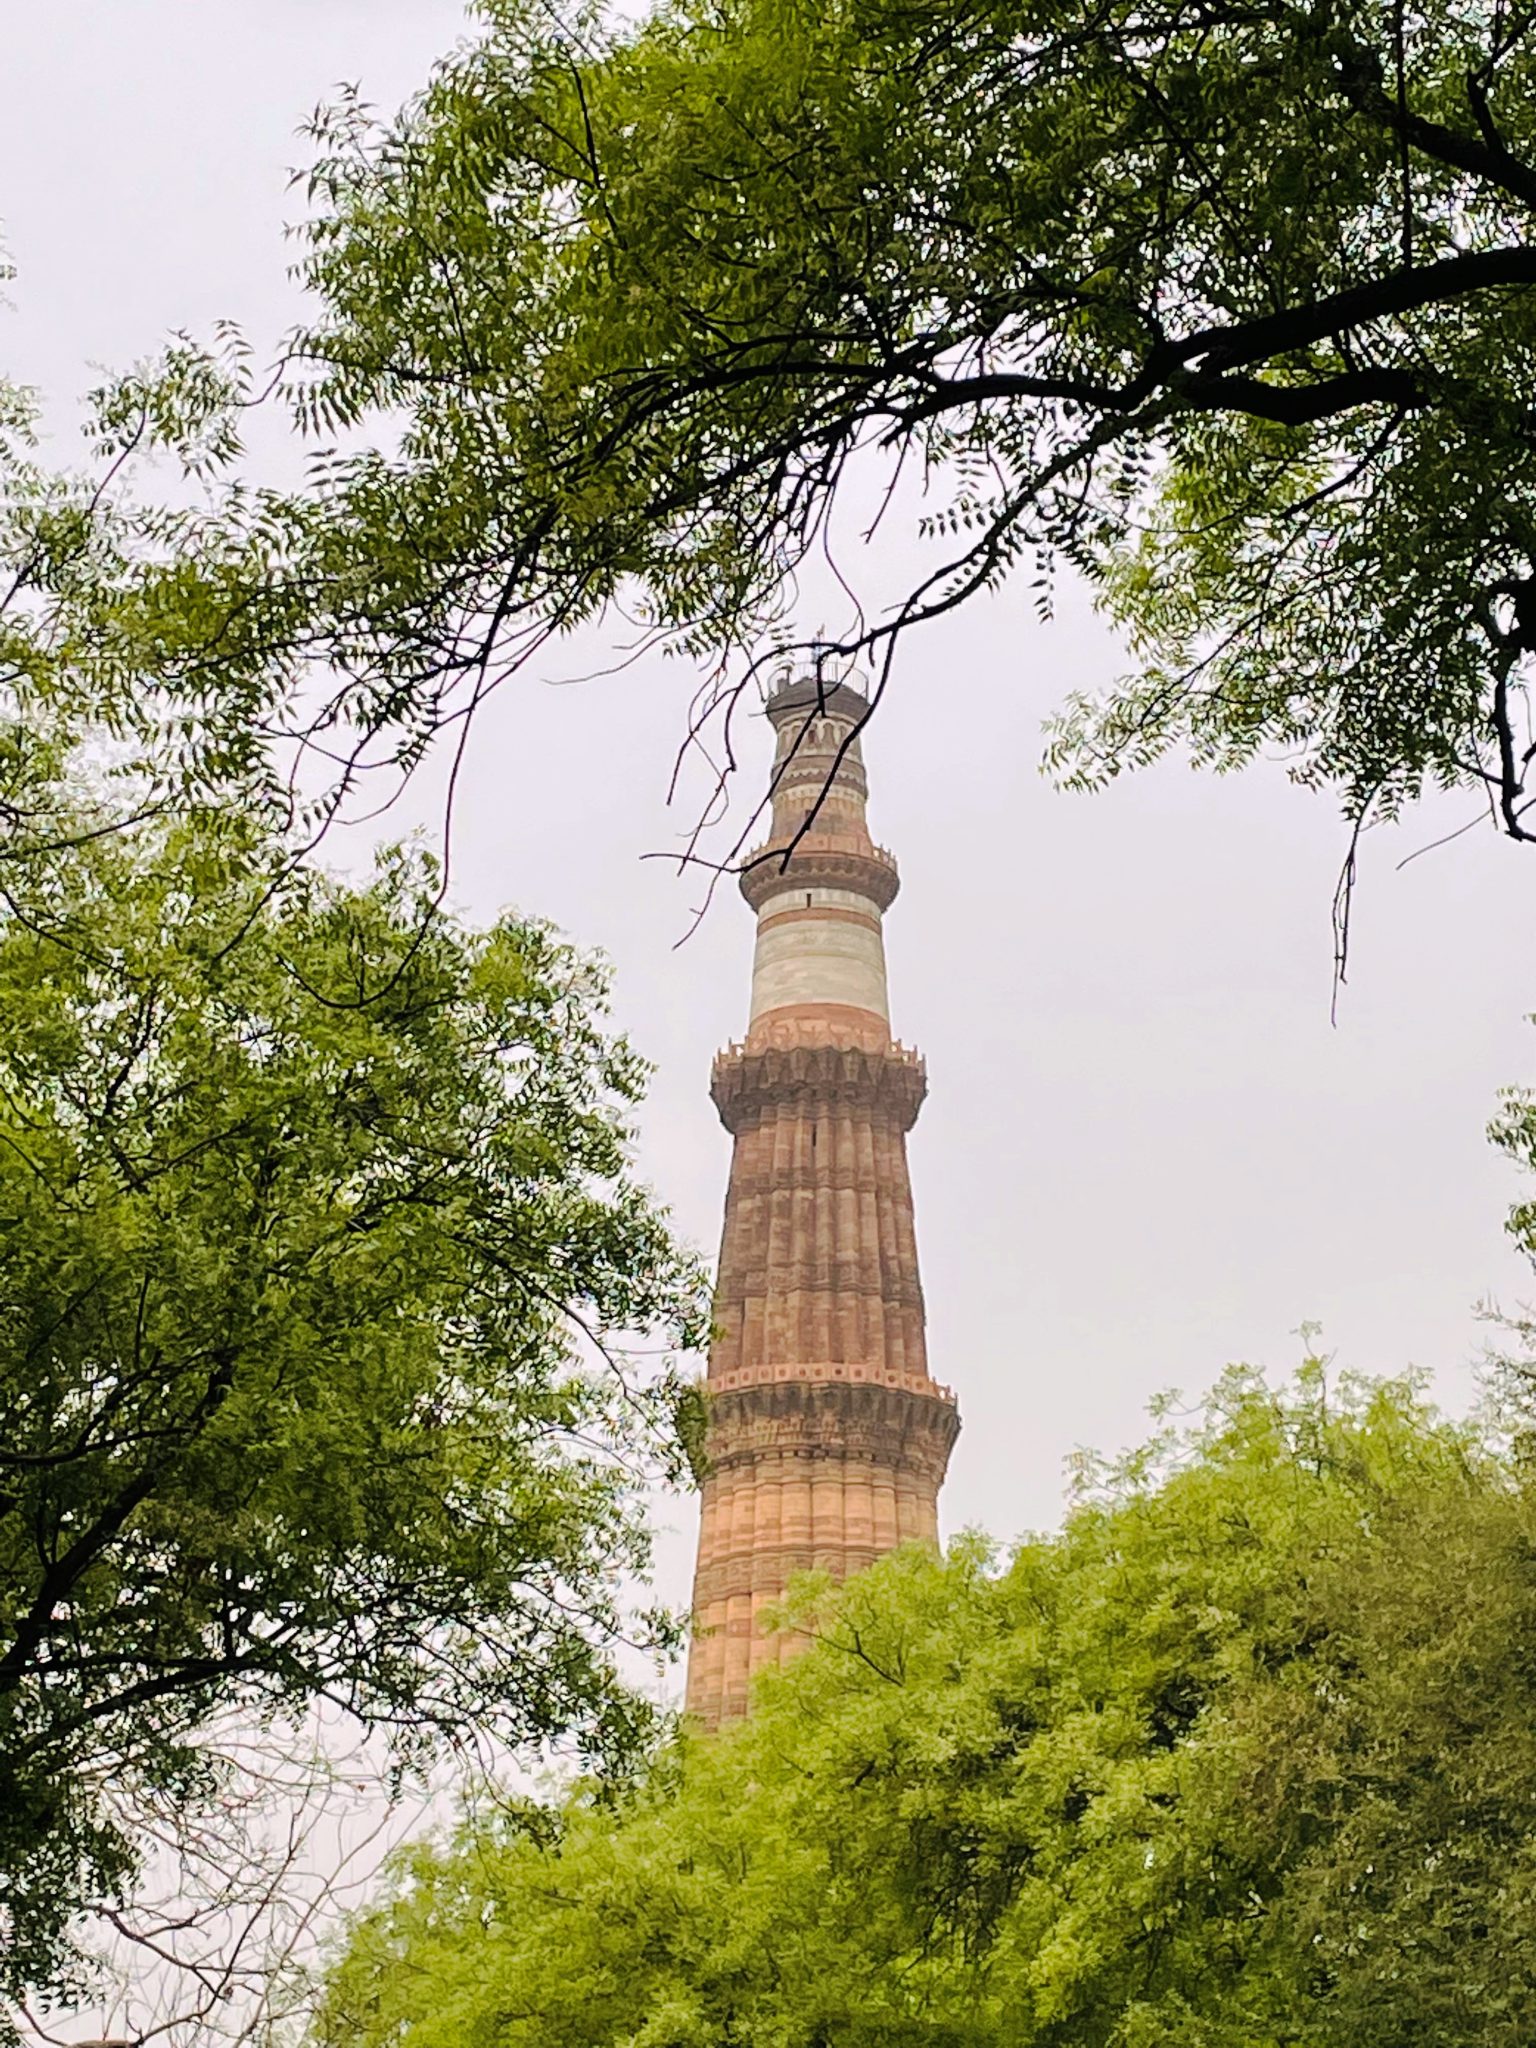 A long view of Qutb Minar, Delhi, India. One of the major tourist attractions of Delhi. It is built in the early 13th century